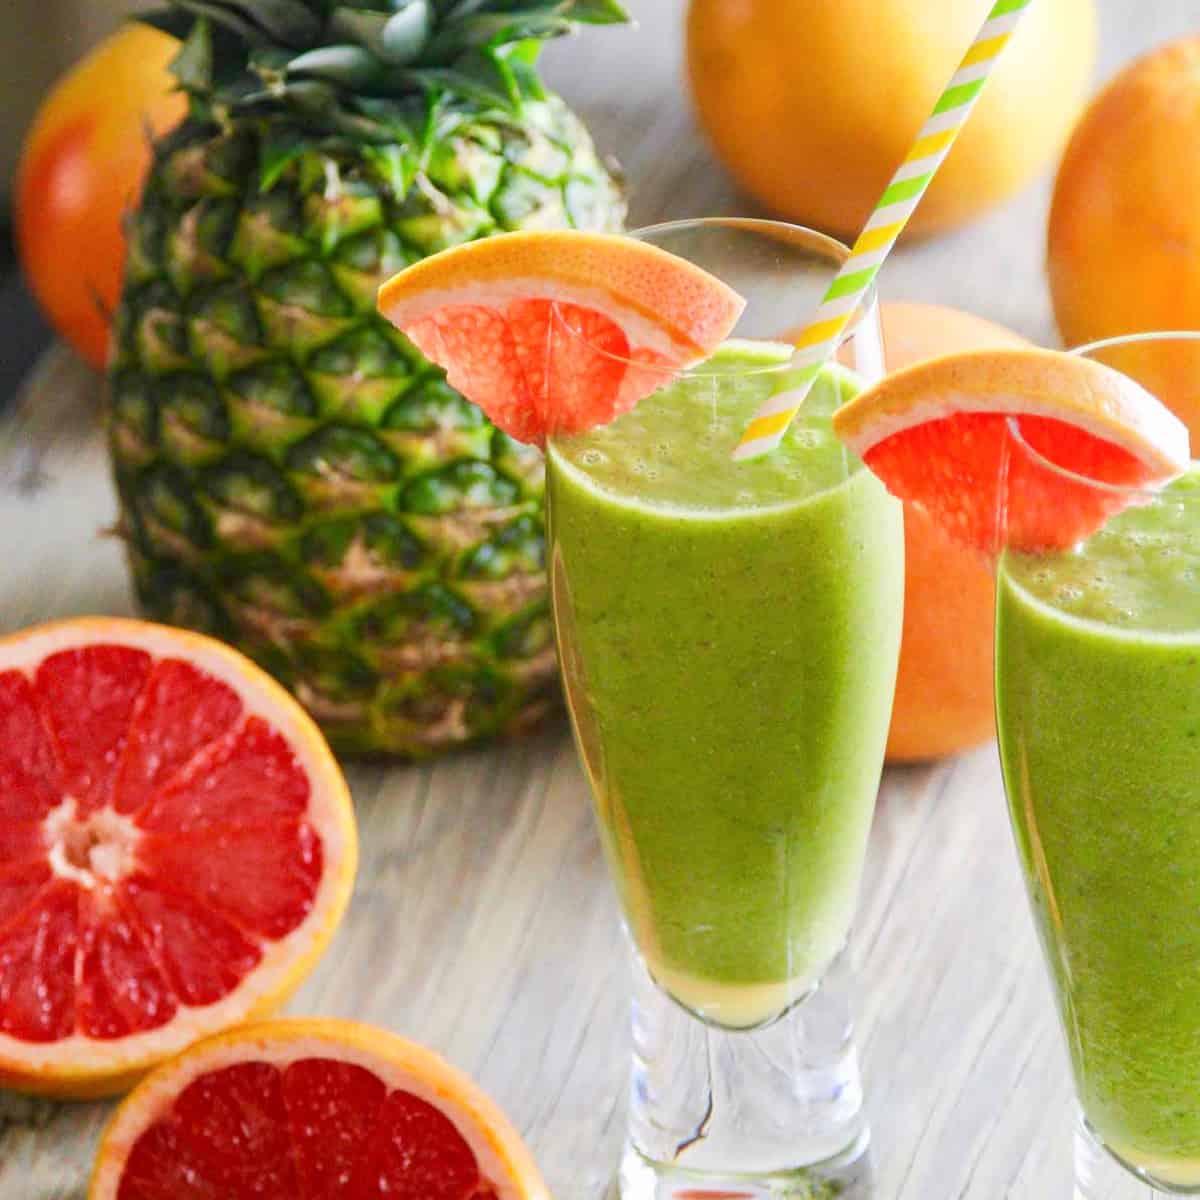 Two glasses of a green smoothie recipe garnished with grapefruit slices and straws.